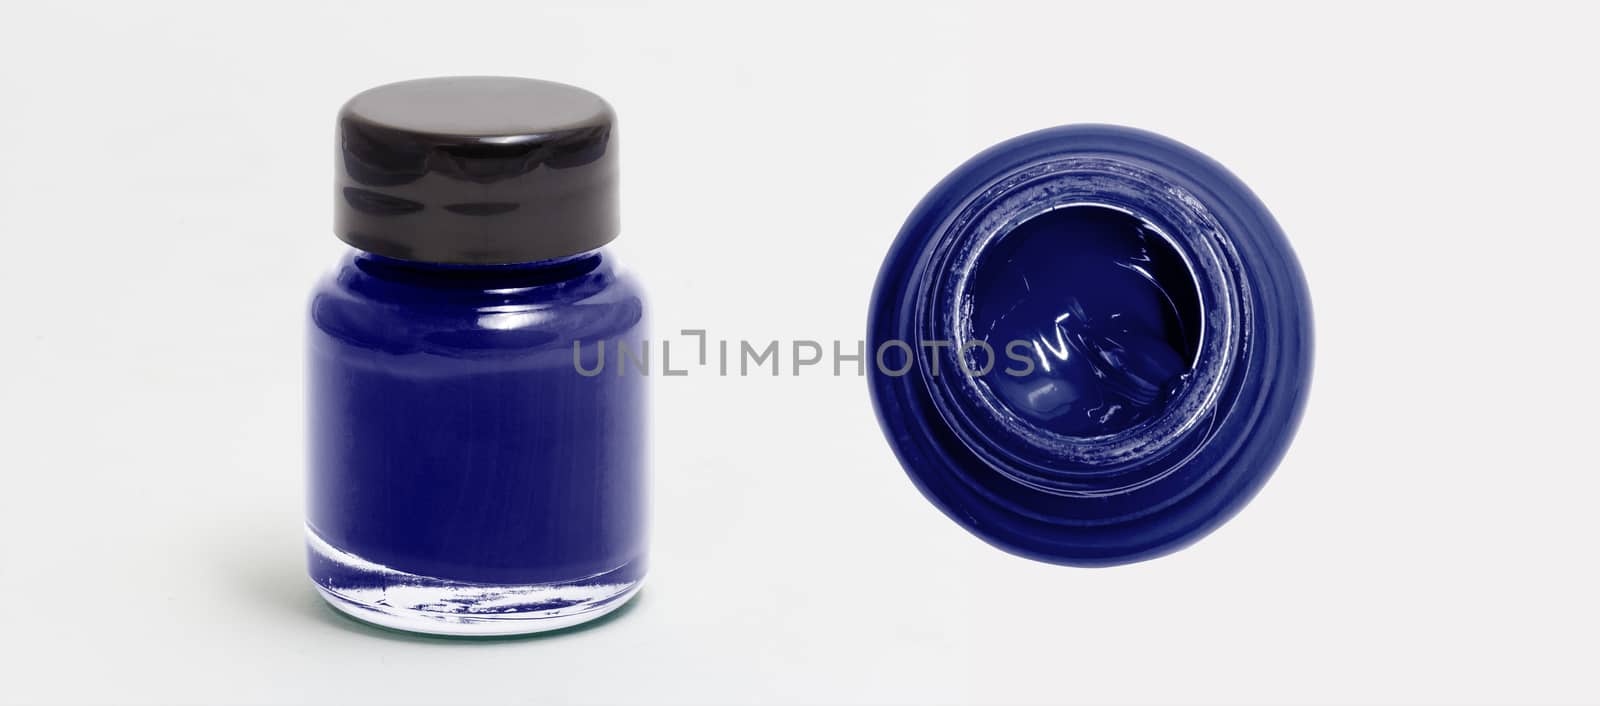 midnightblue acrylic color bottle side and top view white isolat by chingraph